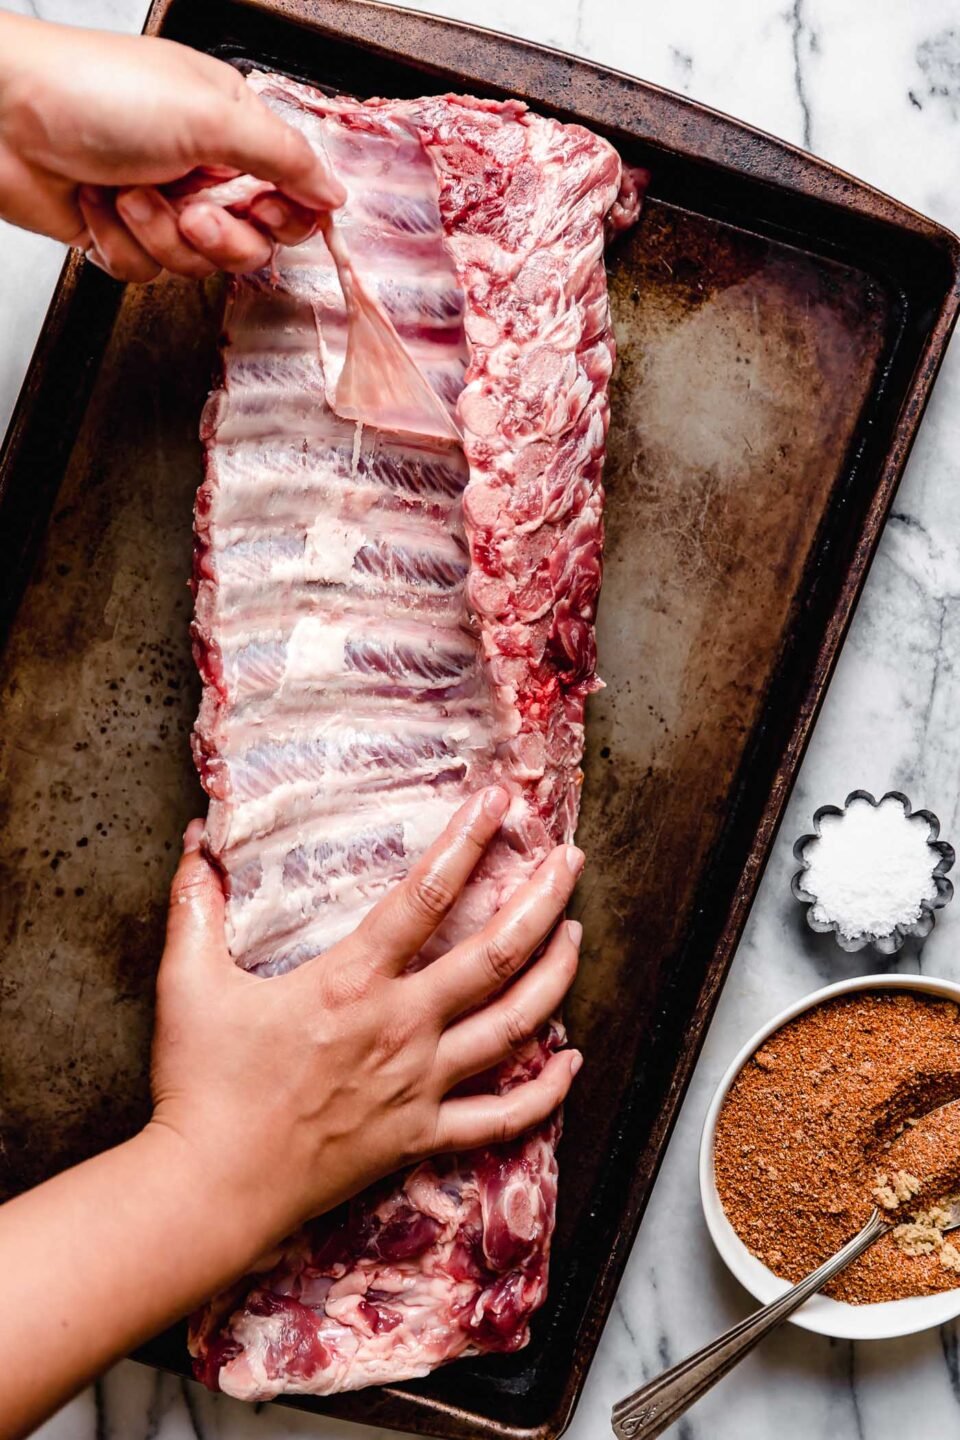 An overhead shot of raw baby back ribs on a sheet pan atop a white marbled surface, with a woman's hand removing the silverback membrane from the ribs. A small dish of dry rub and a small dish of salt sit alongside the pan.